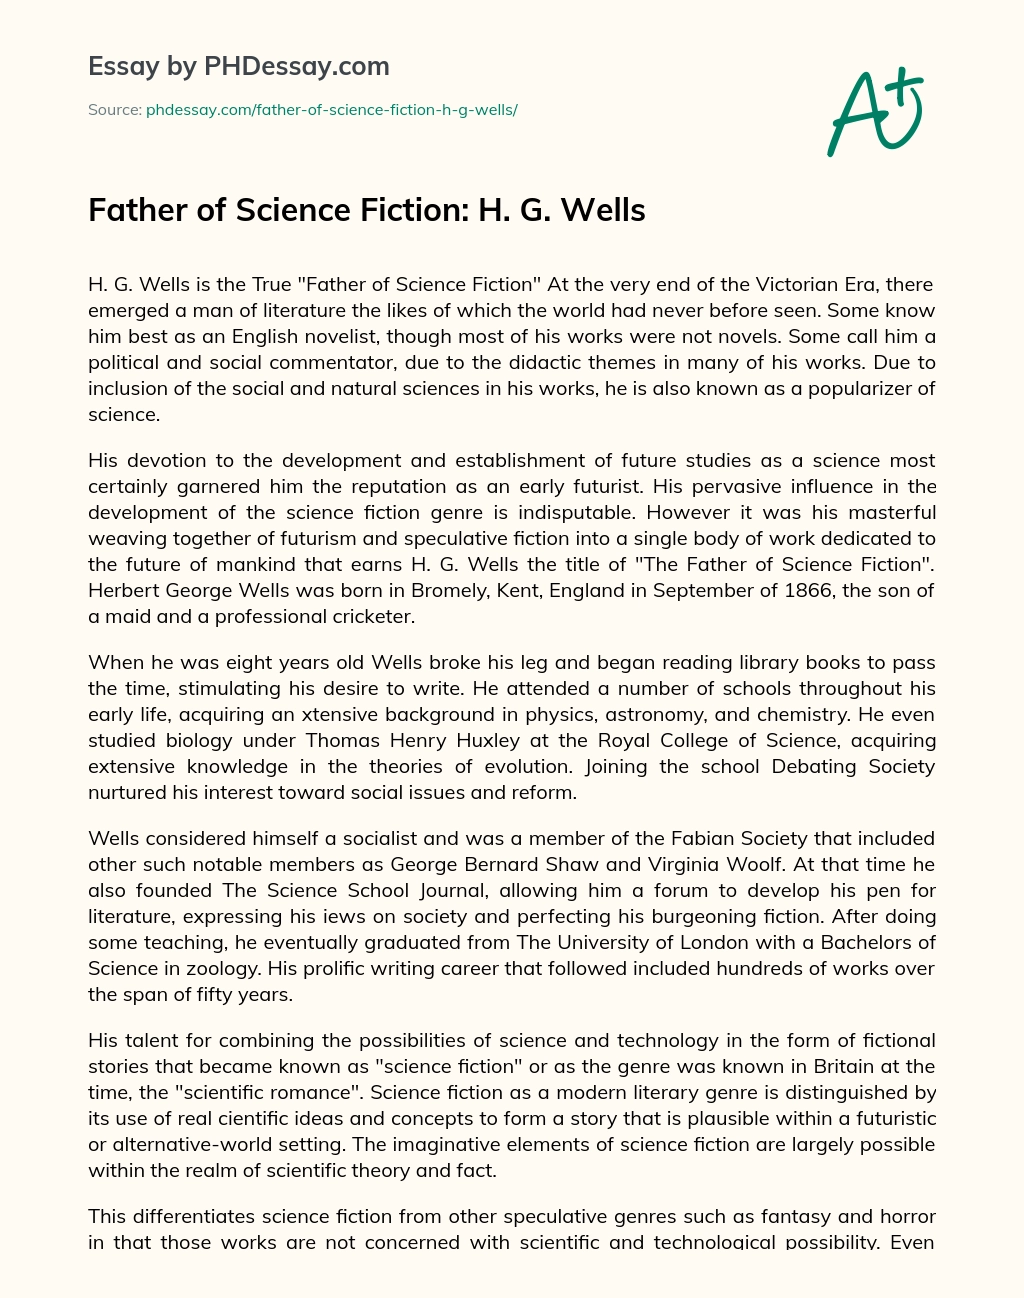 Father of Science Fiction: H. G. Wells essay